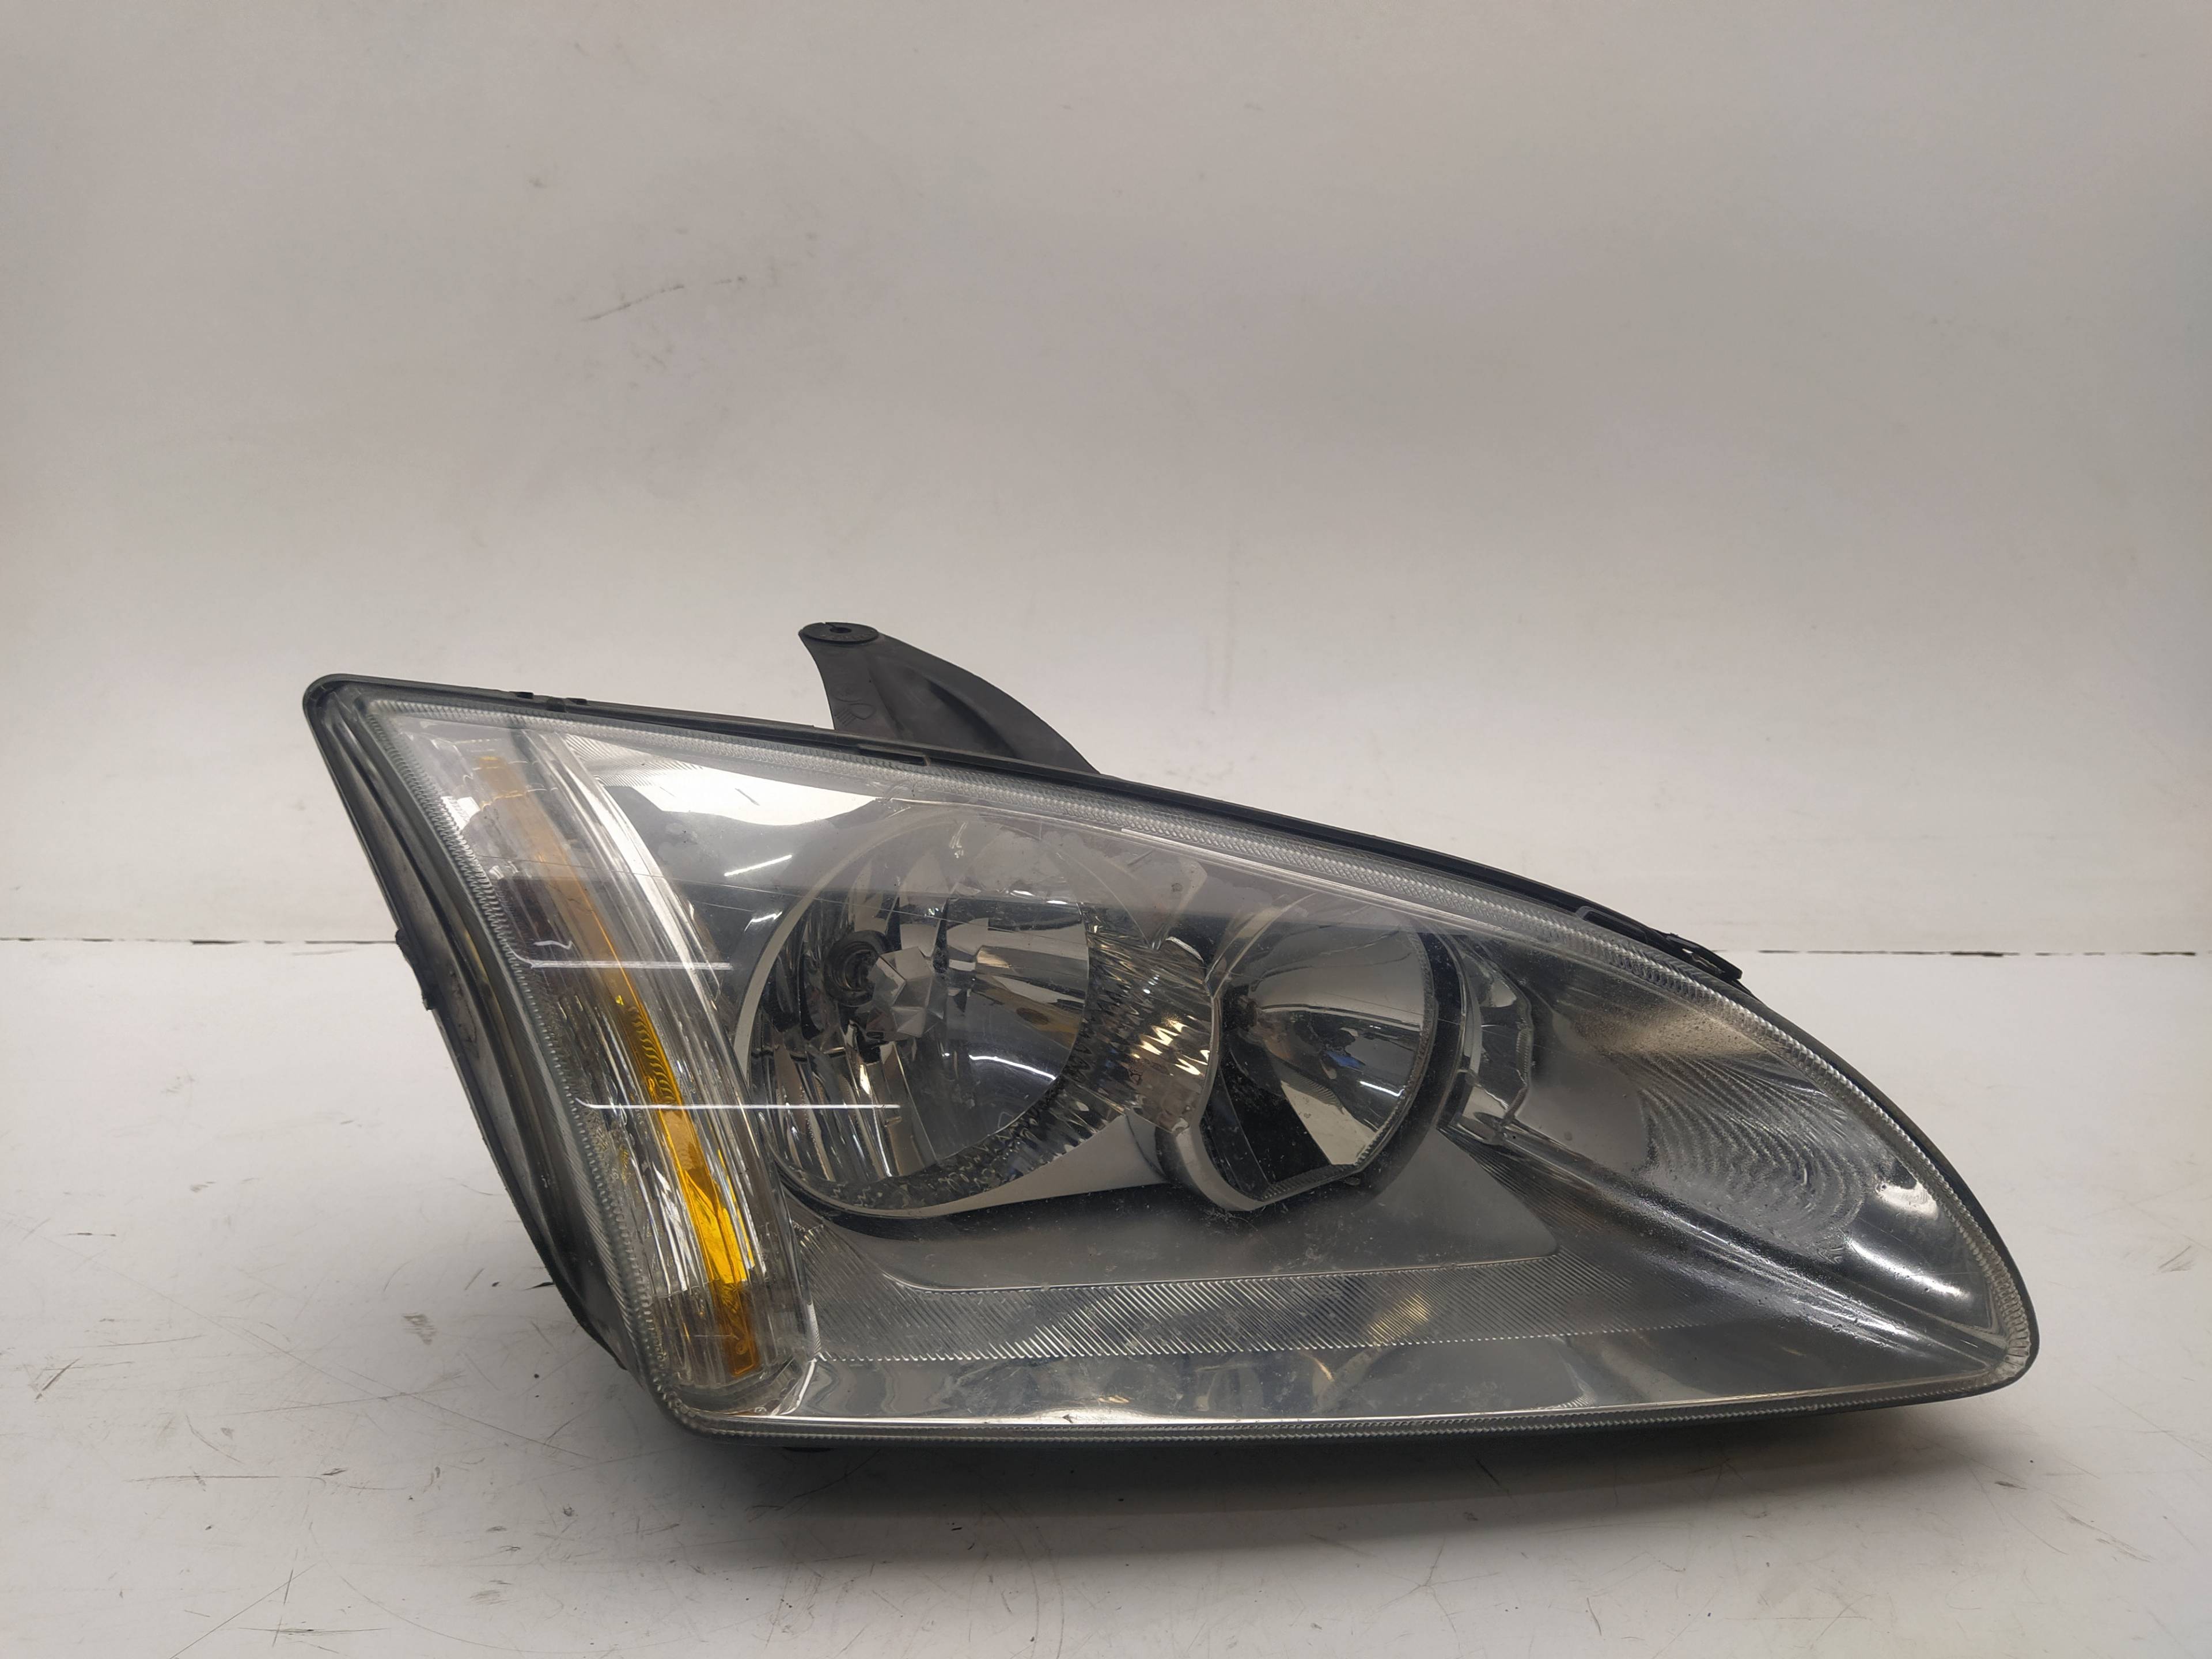 FORD Focus 2 generation (2004-2011) Front Right Headlight 4M5113W029AC 18593380